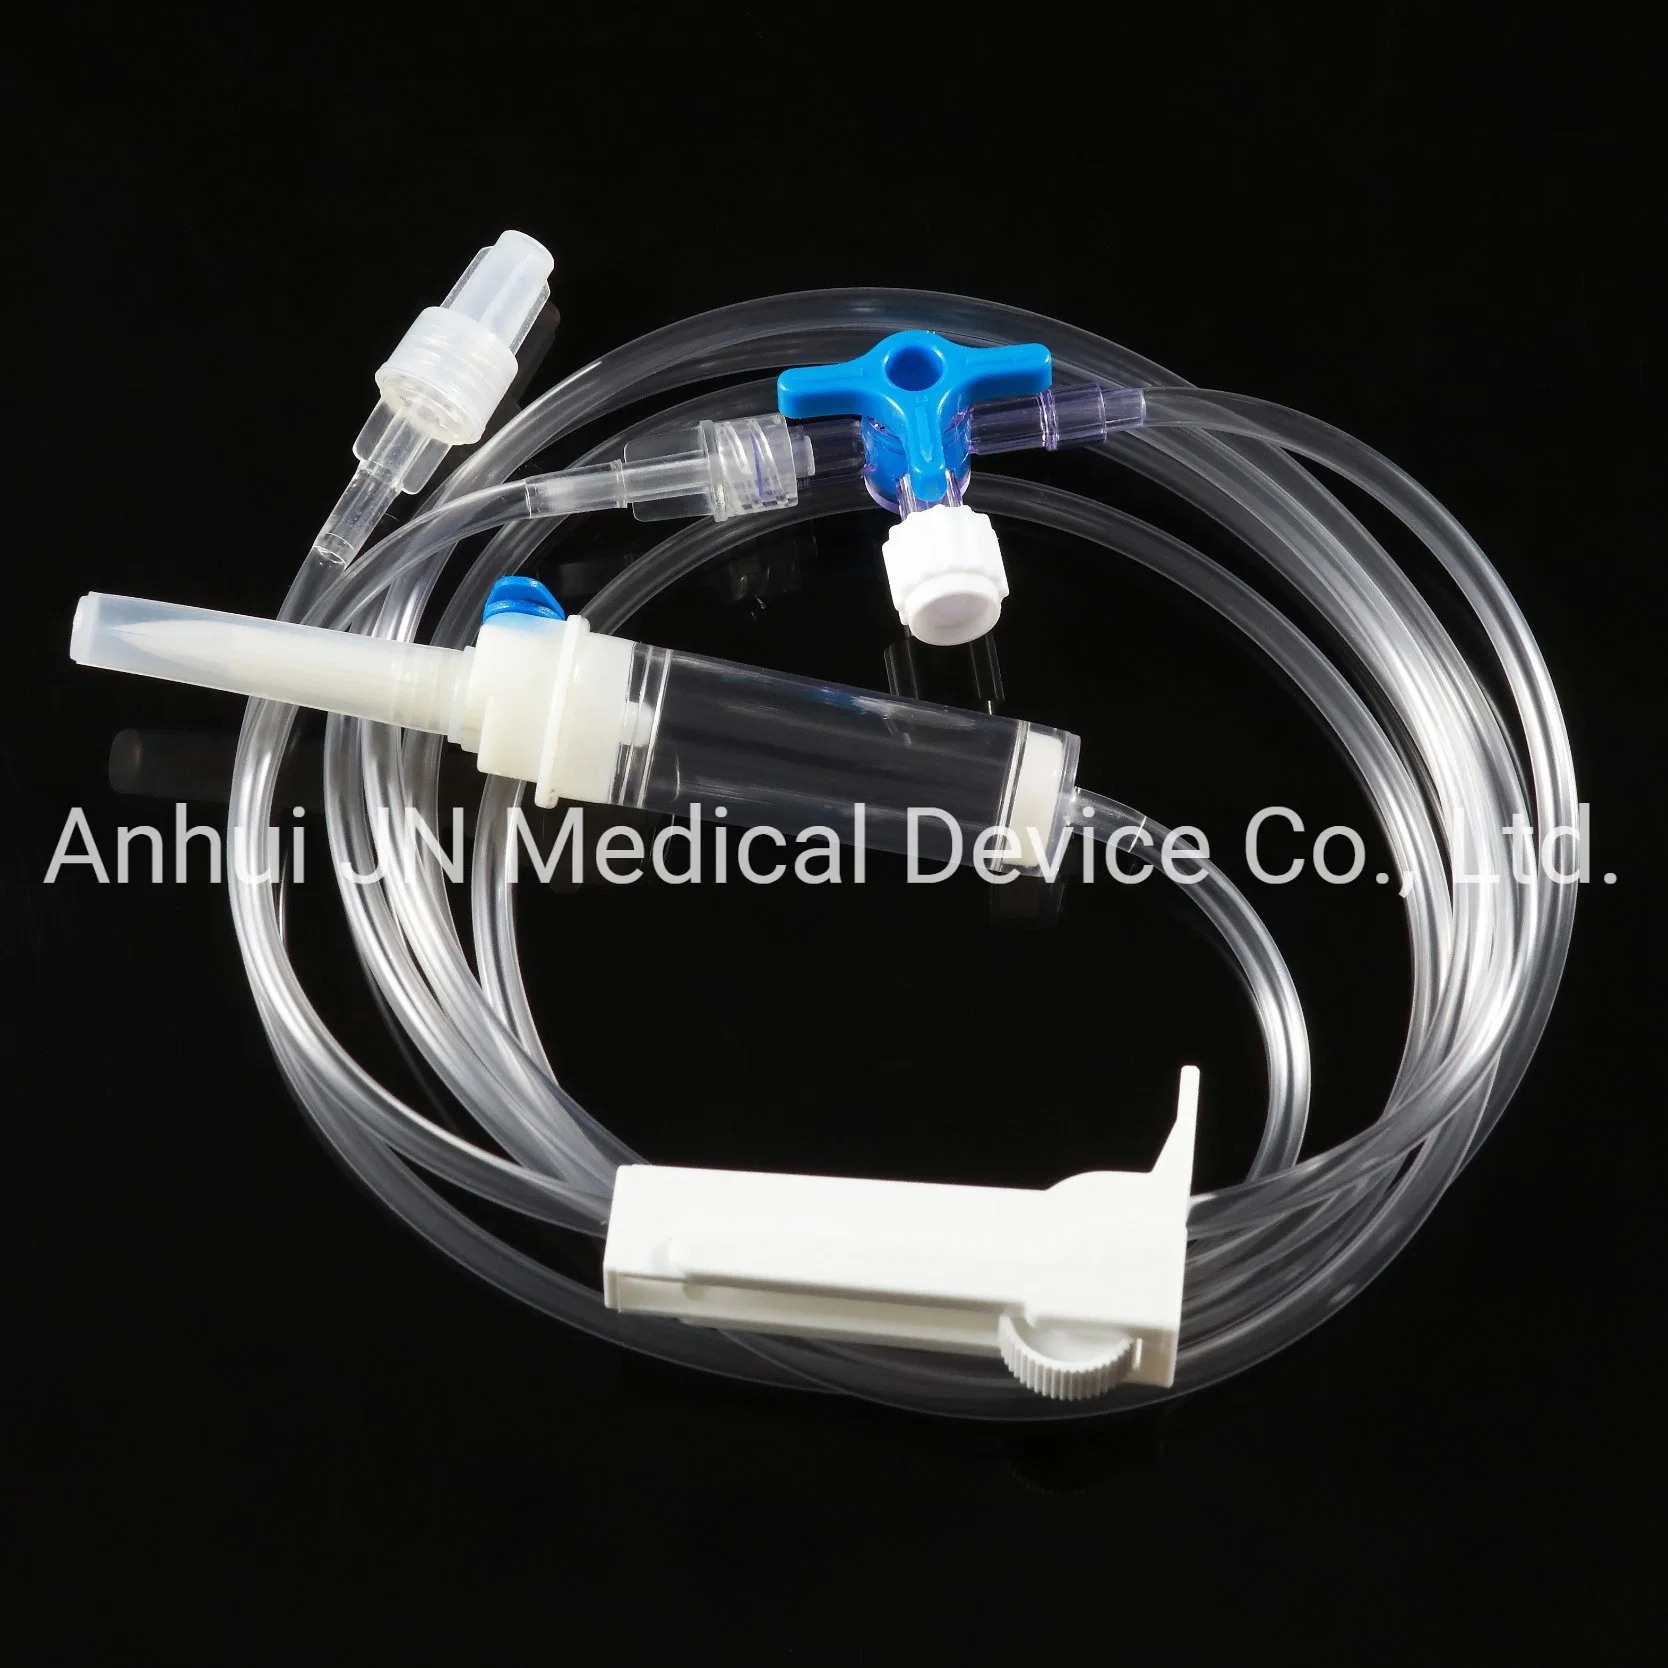 Sterile Precision Flow Control Medical IV Infusion Set with CE Approval